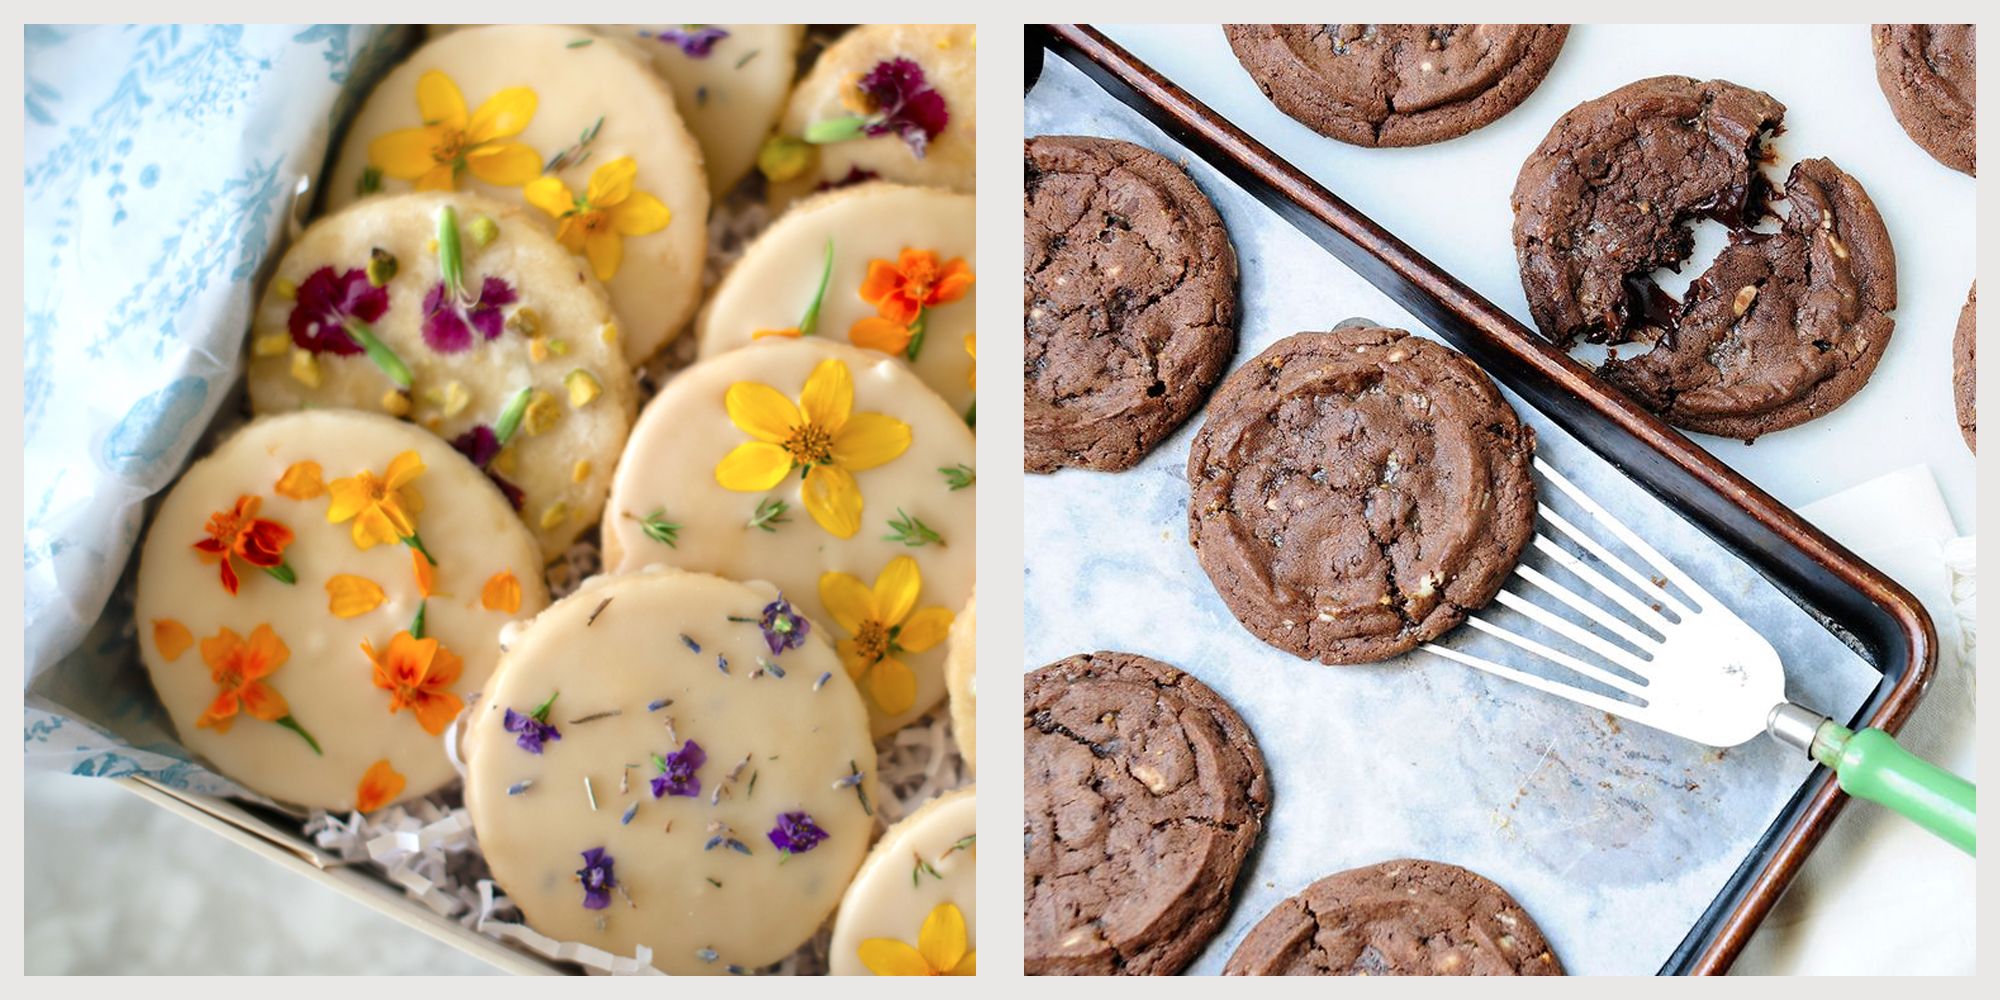 The Cookie Faves Tin